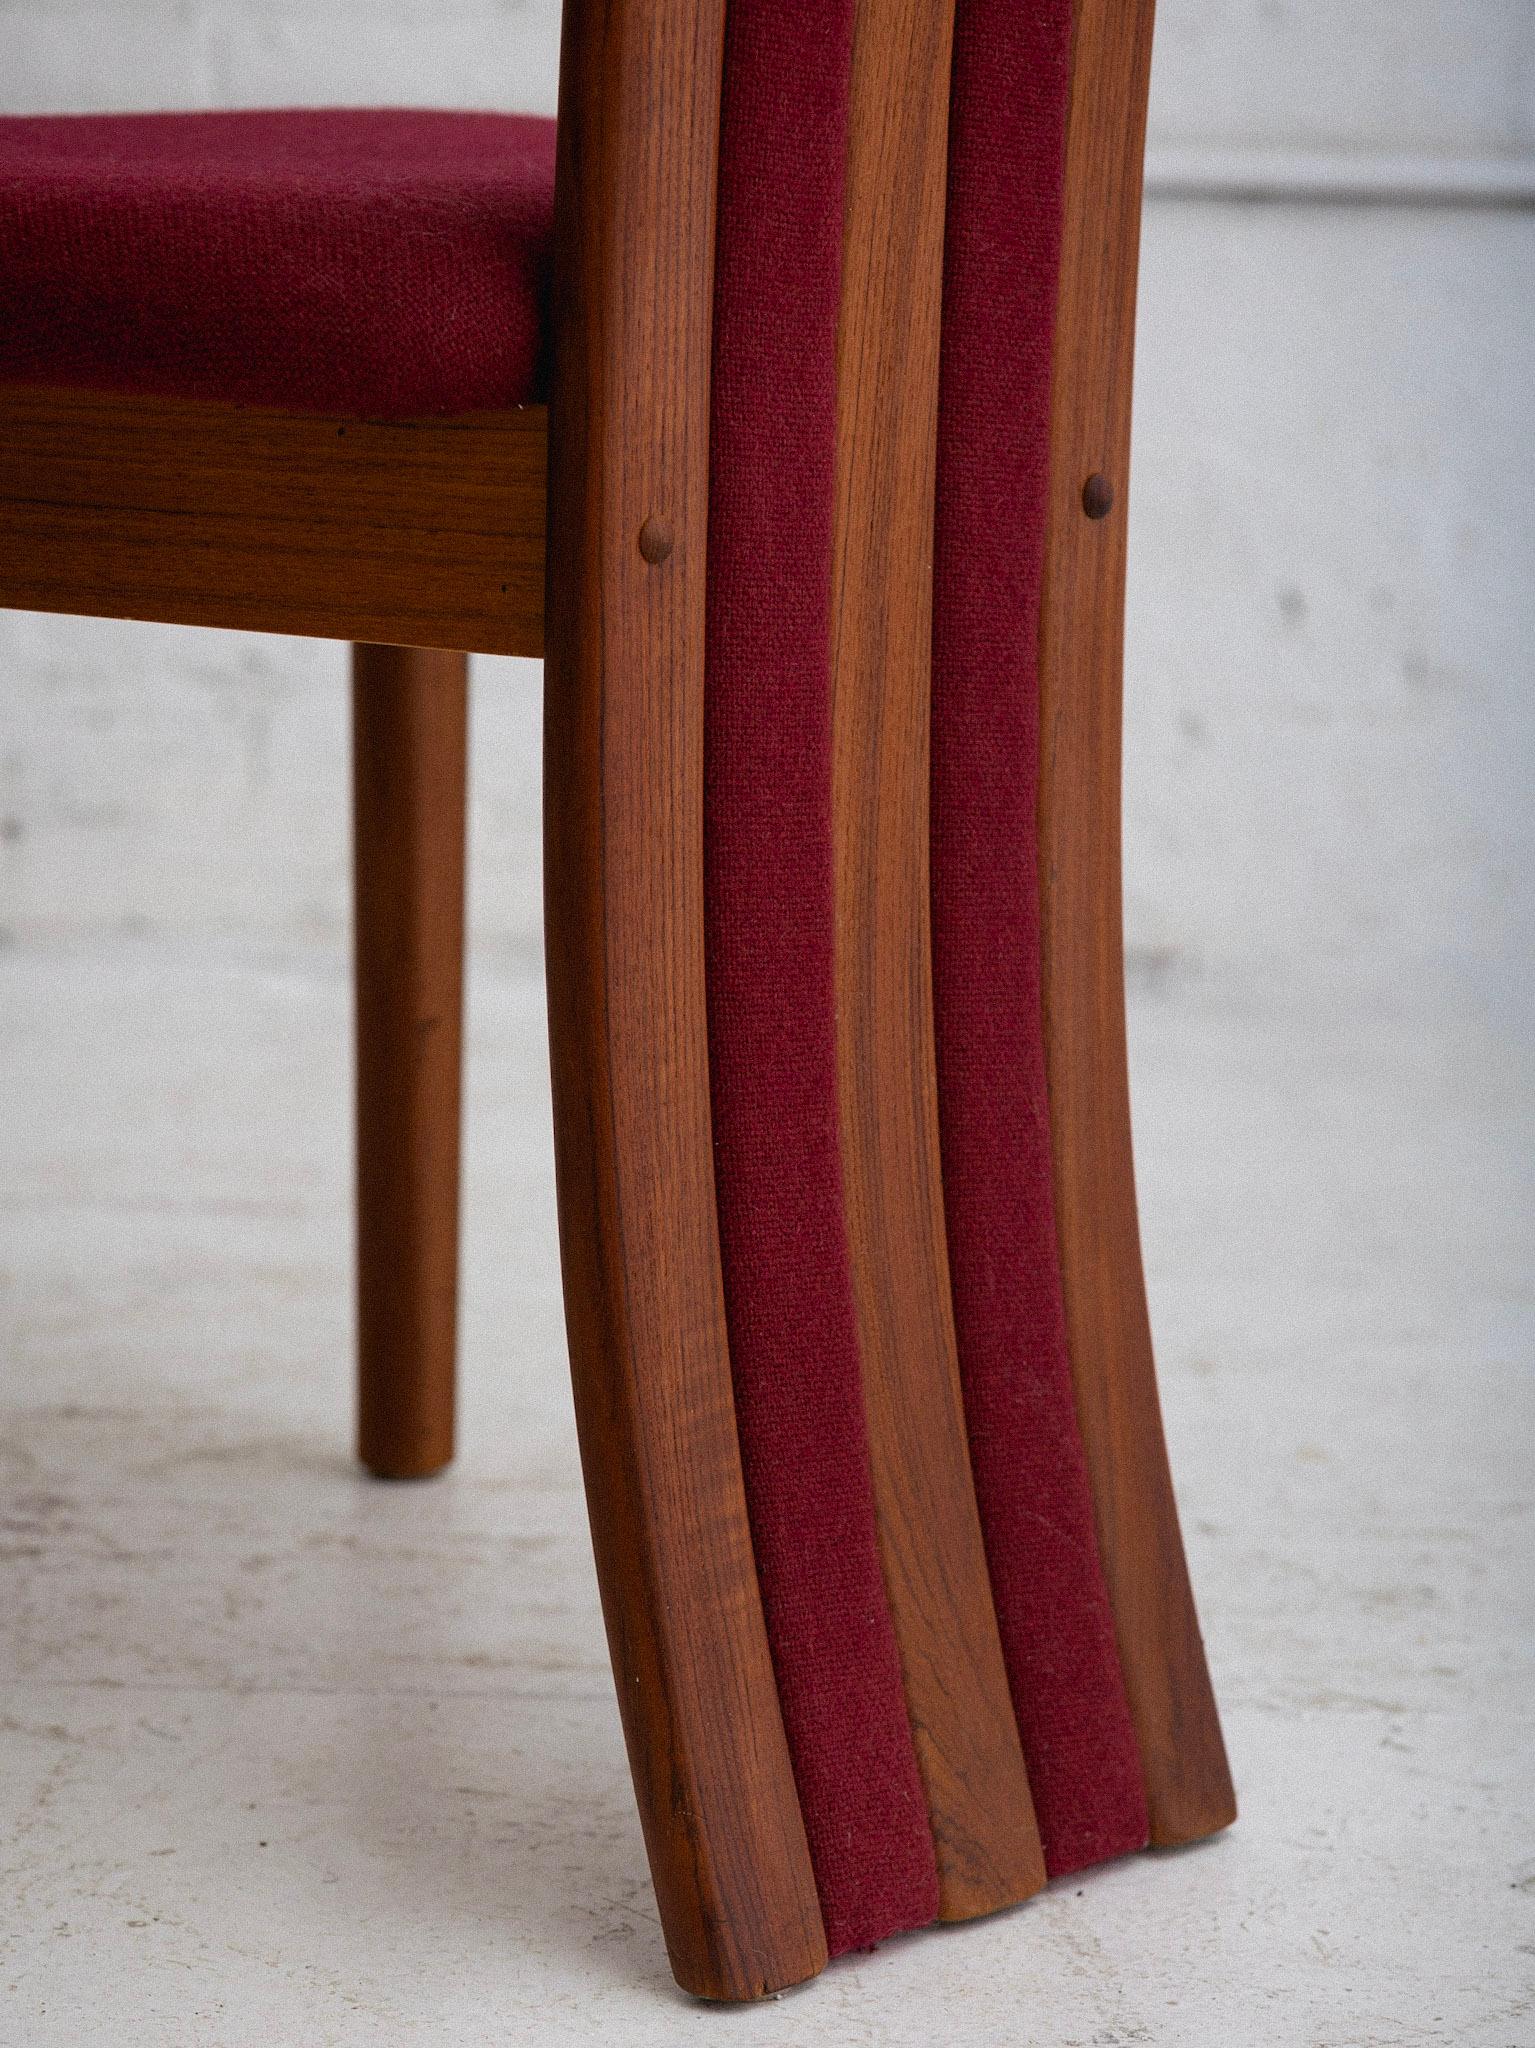 Post Modern Sculpted Teak Dining Chairs by Benny Linden - a Set of 6 2